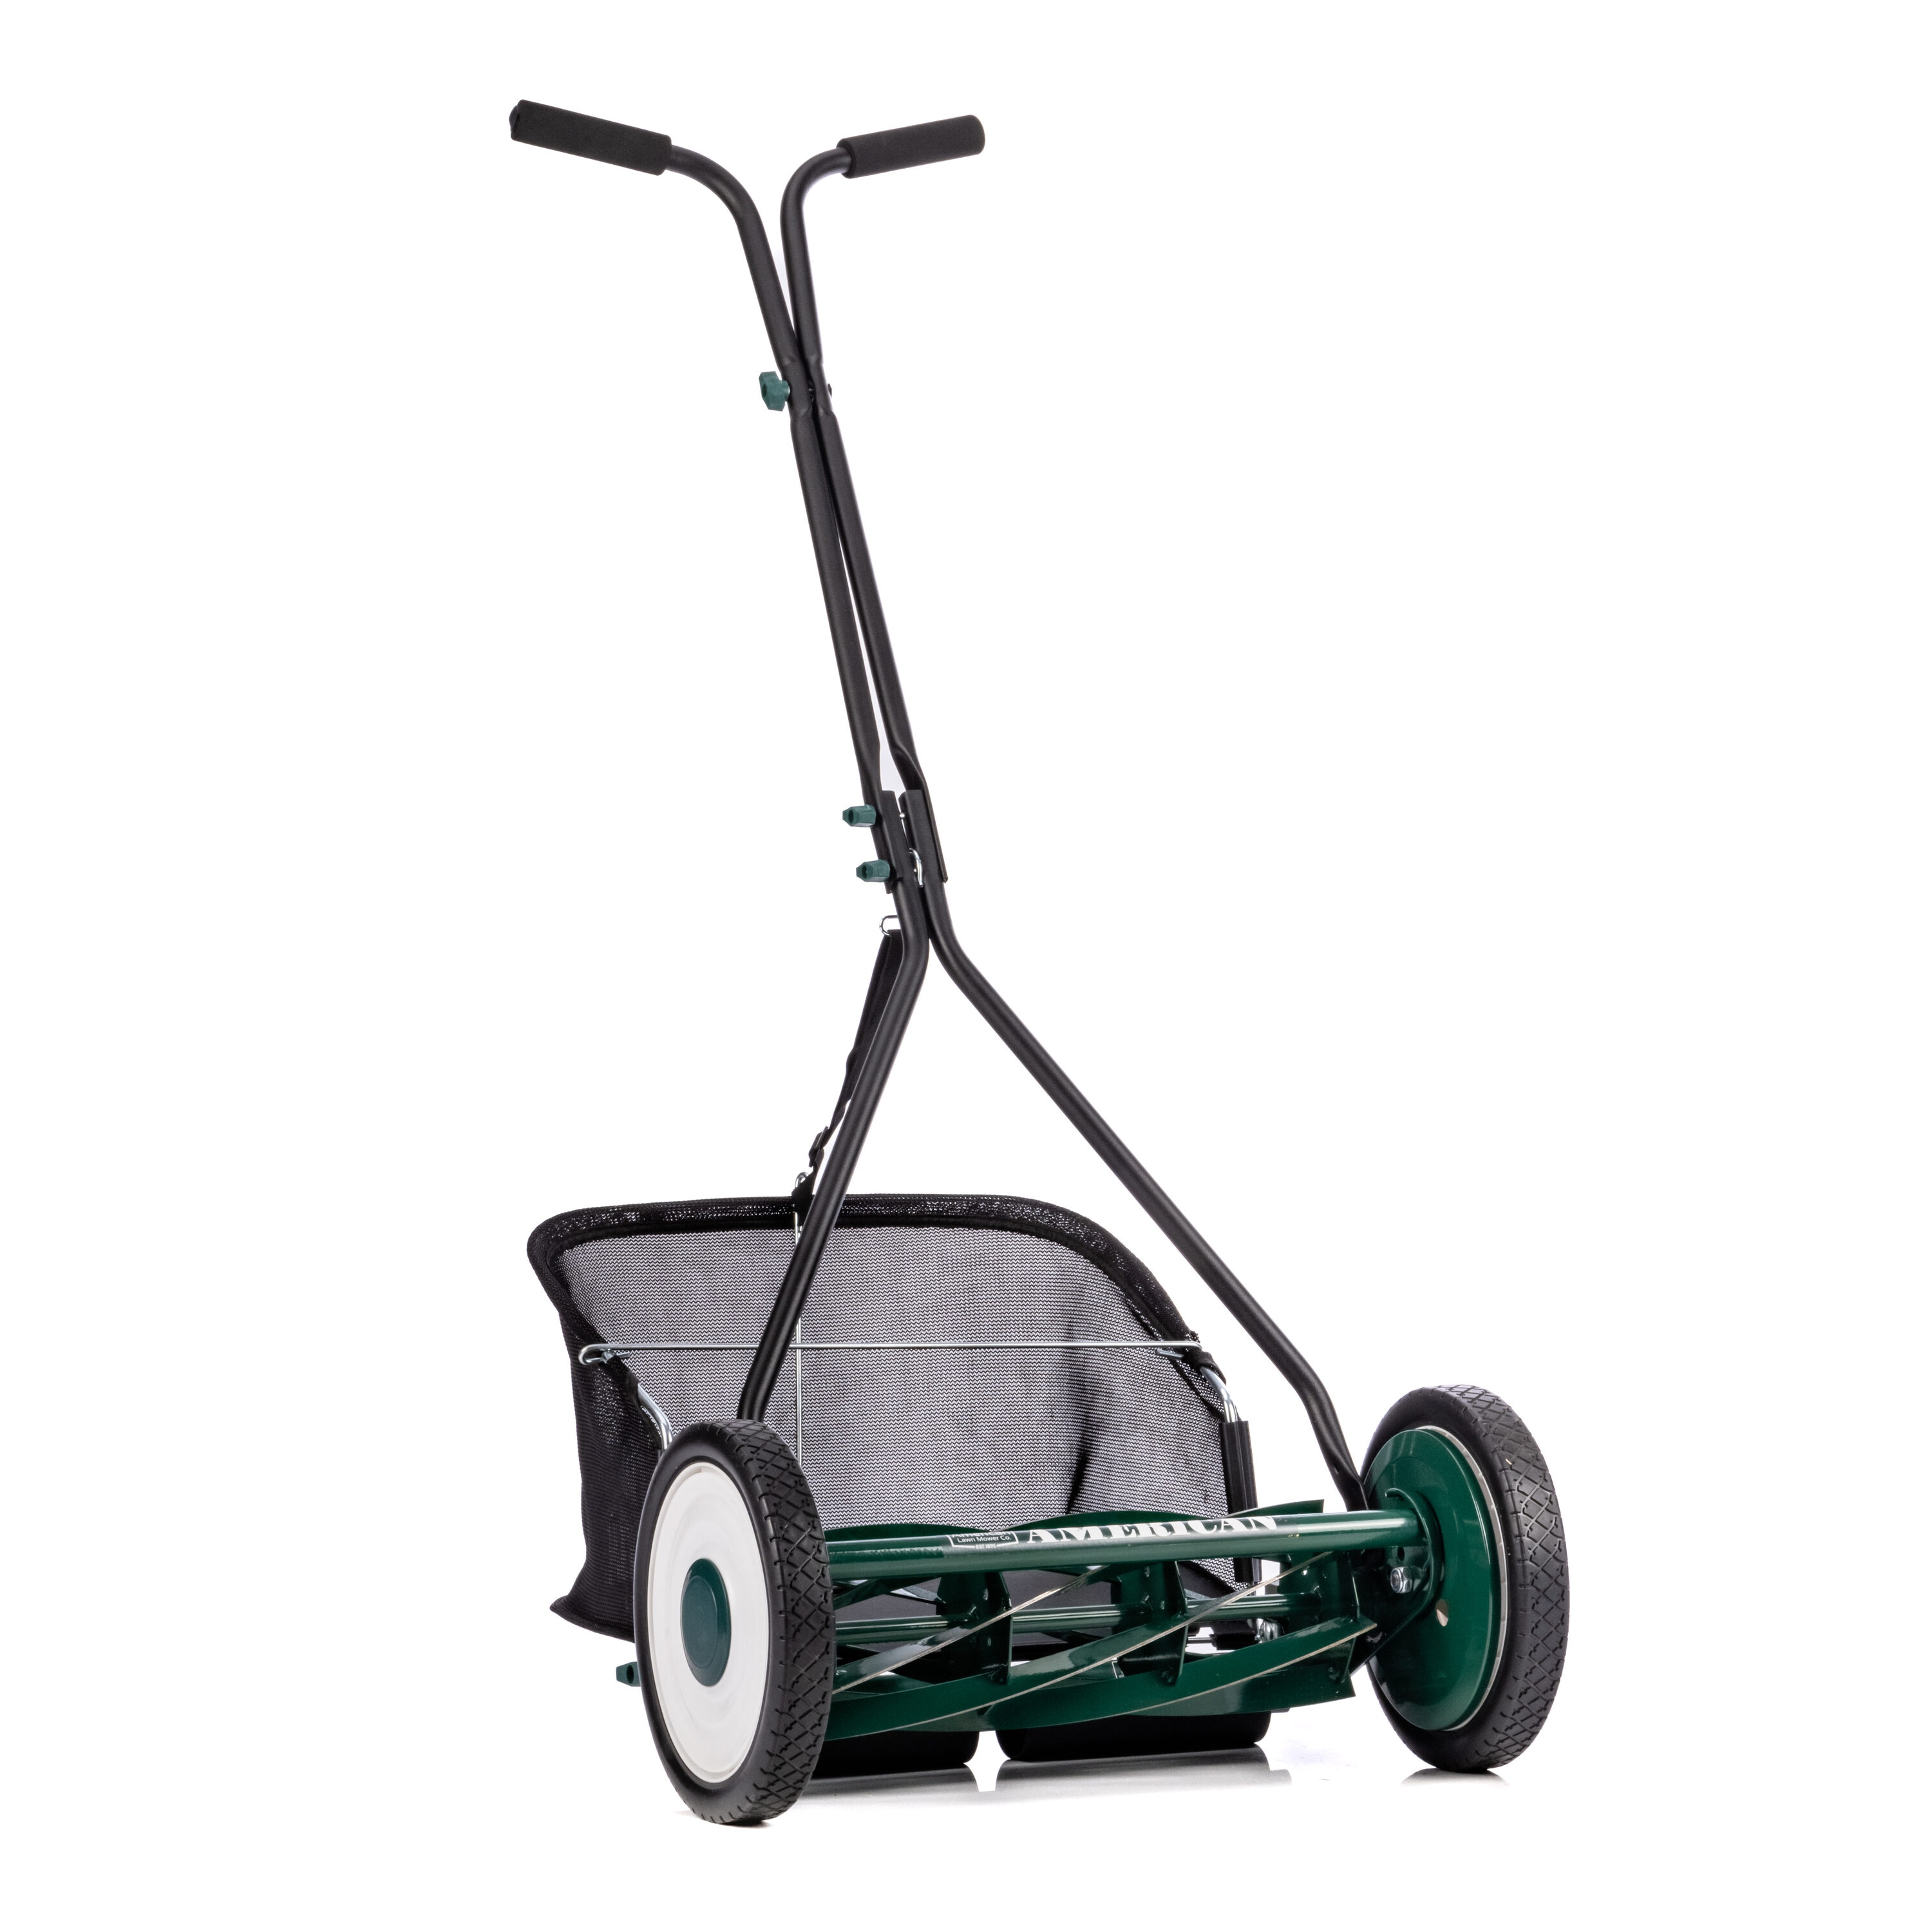 Reel Mower 12inch, Reel Lawn Mower with Adjustable Mowing Height, 5 Blades  and Collection Bag, Push Reel Lawn Mower Walk-Behind Lawn Mowers for